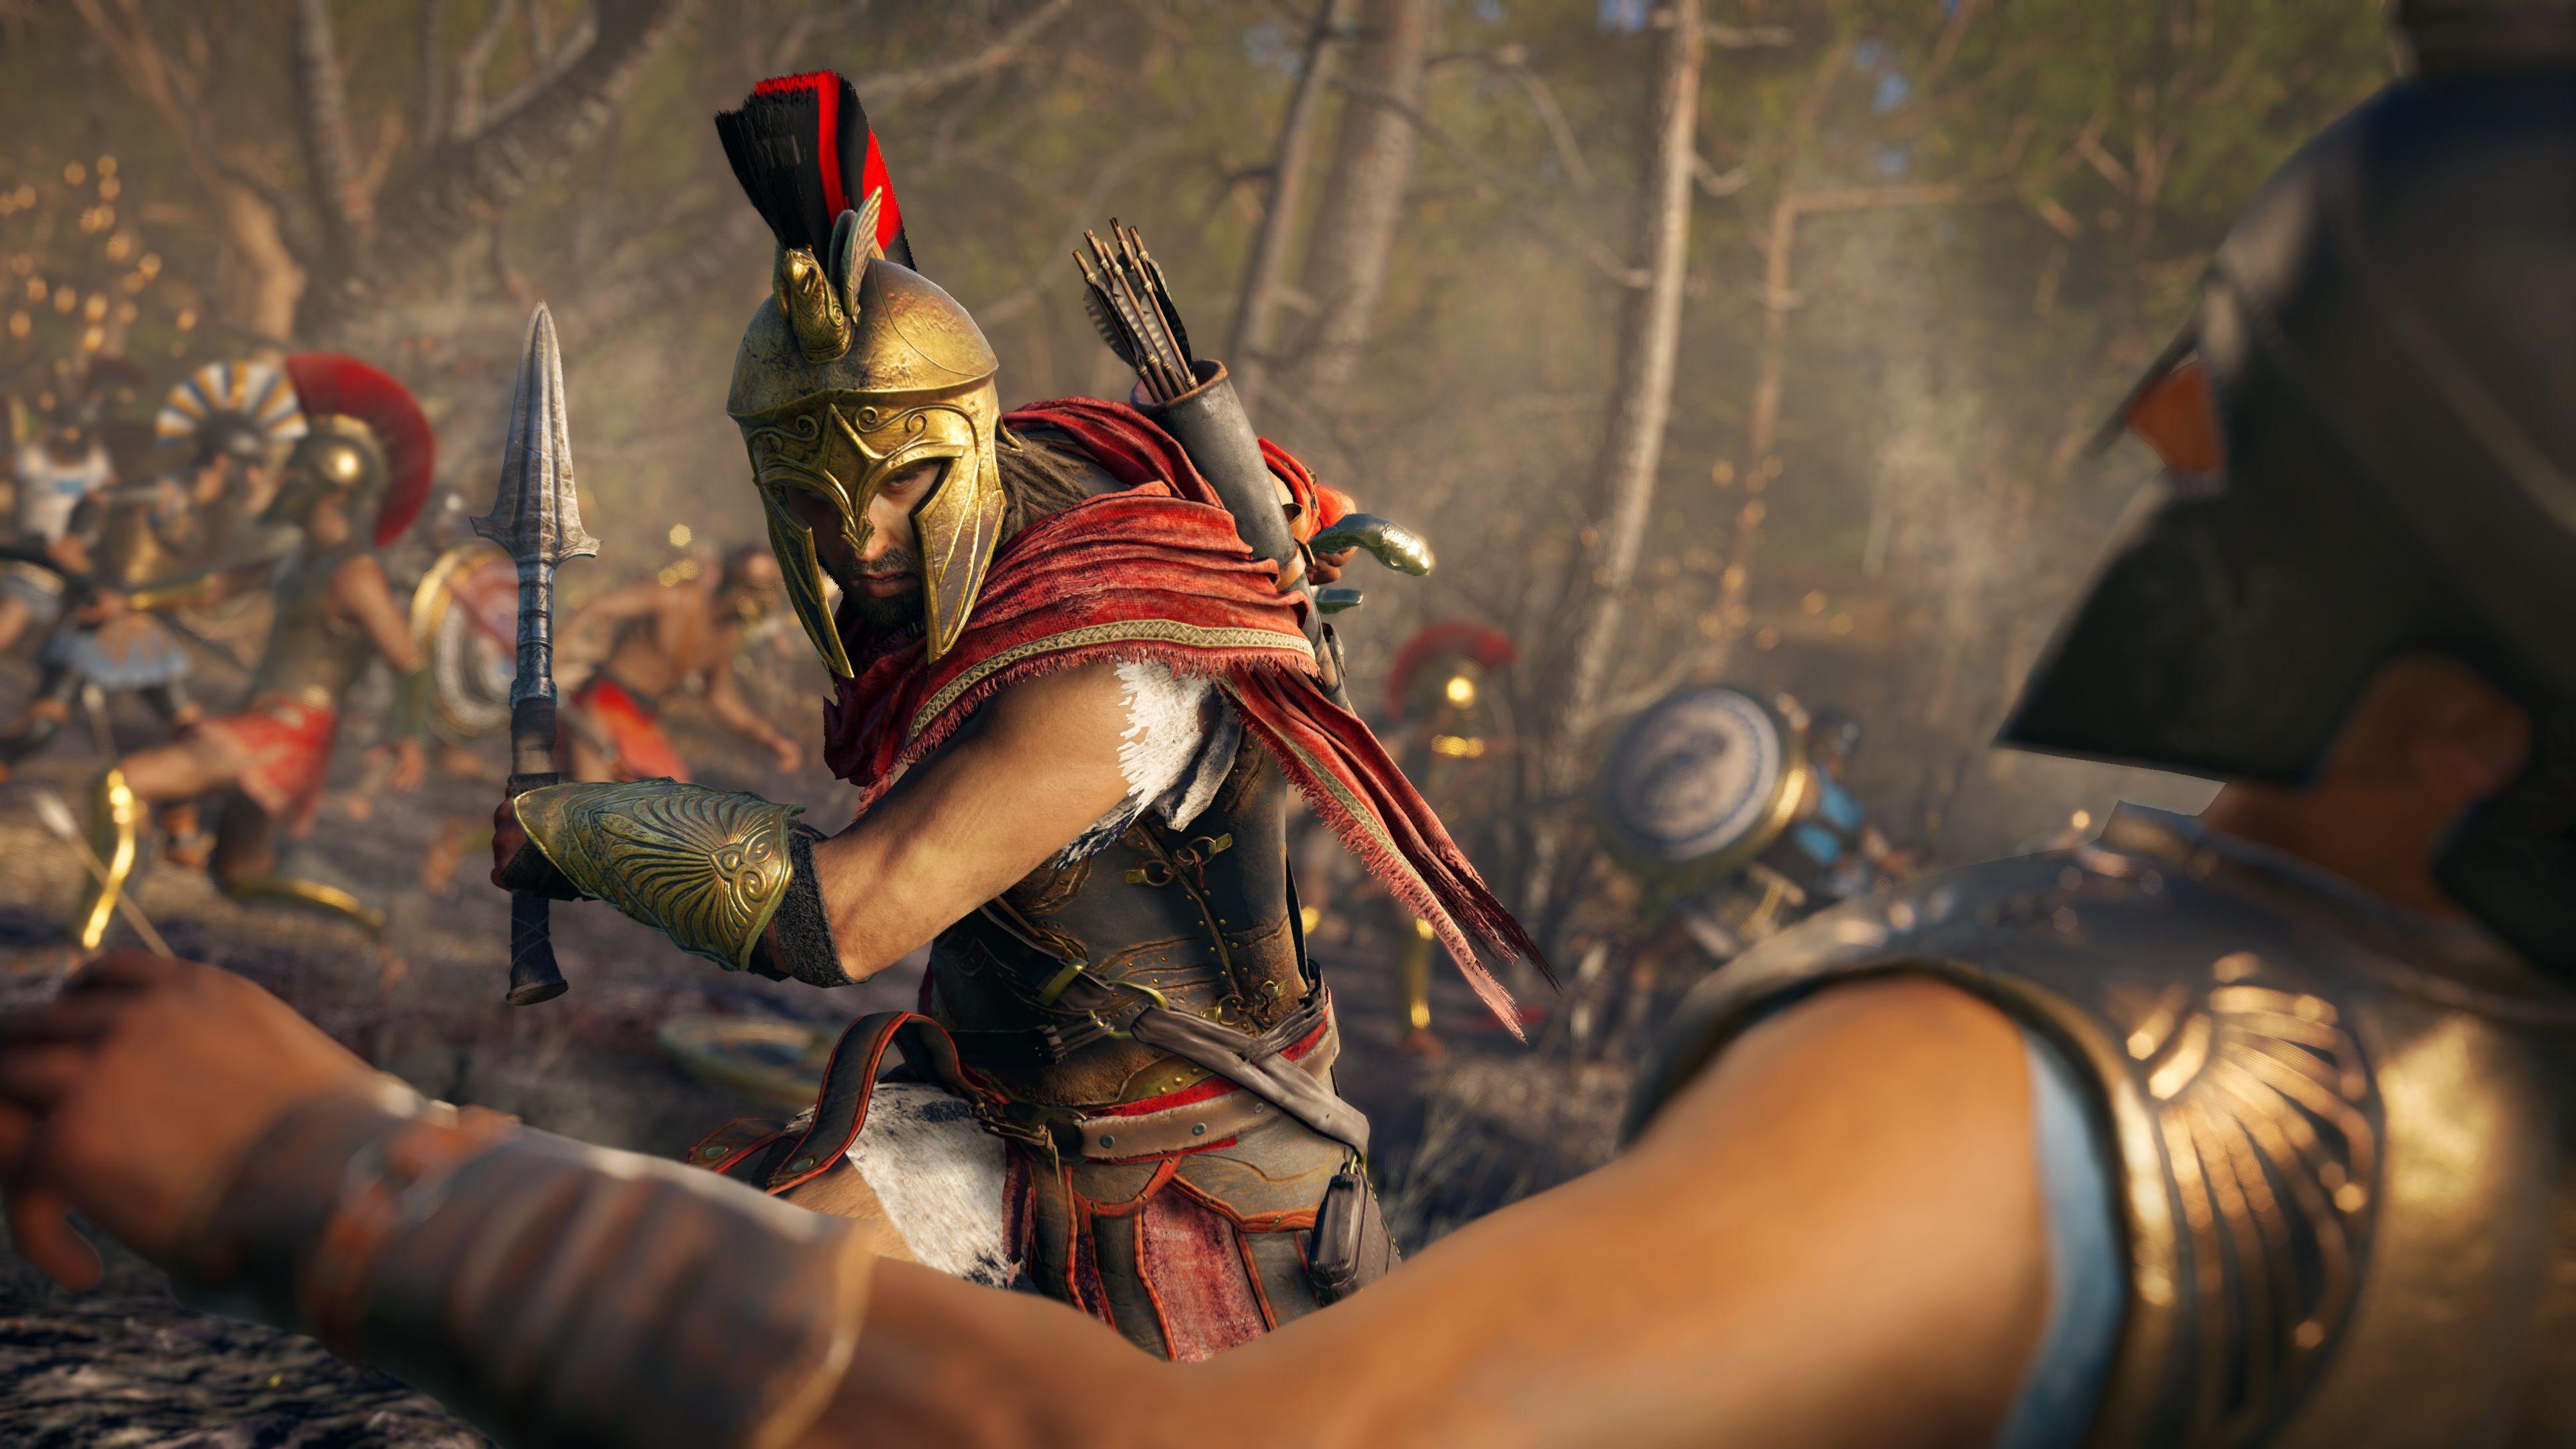 Assassin's Creed Odyssey 4k Ultra HD Wallpapers and Backgrounds Image